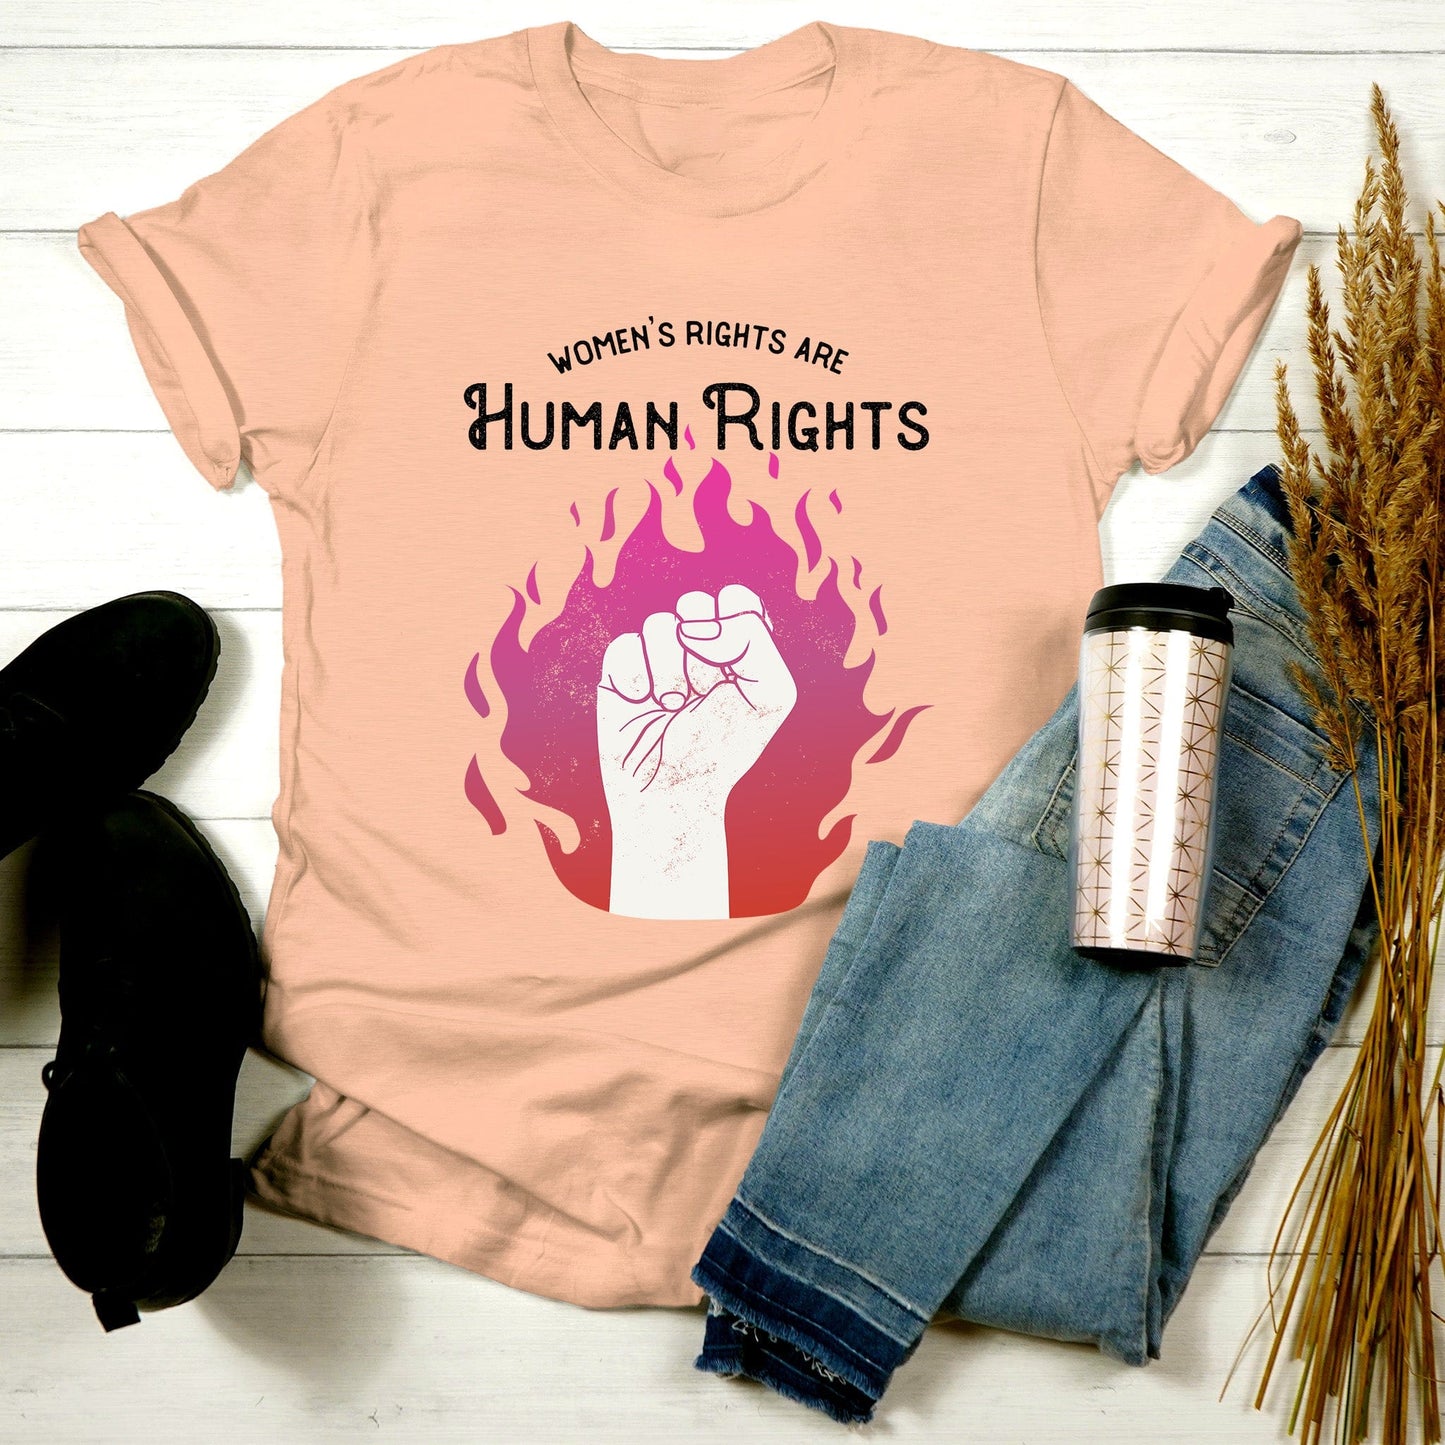 Heather Peach color unisex t-shirt with a graphic of a fist over pink and red flames. The text says, “Women’s rights are human rights” with the words “women’s rights are” arched over the words “Human Rights”.